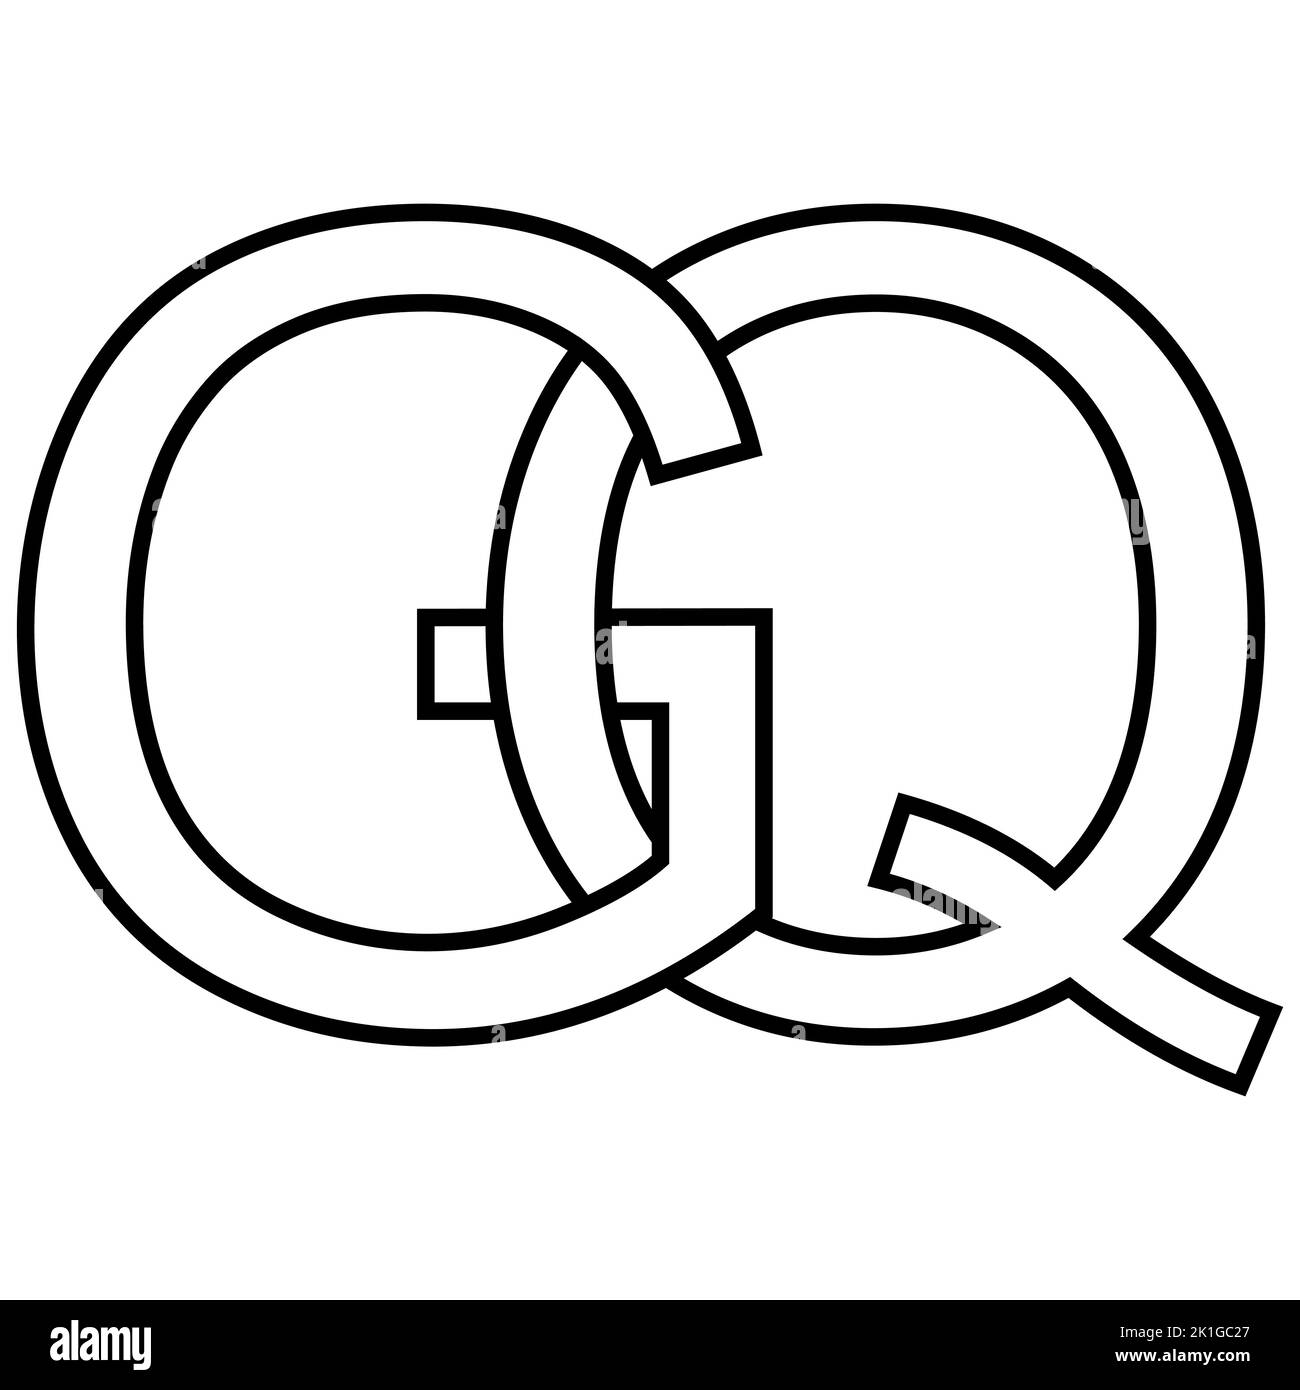 Logo sign gq qg icon nft interlaced letters g q Stock Vector